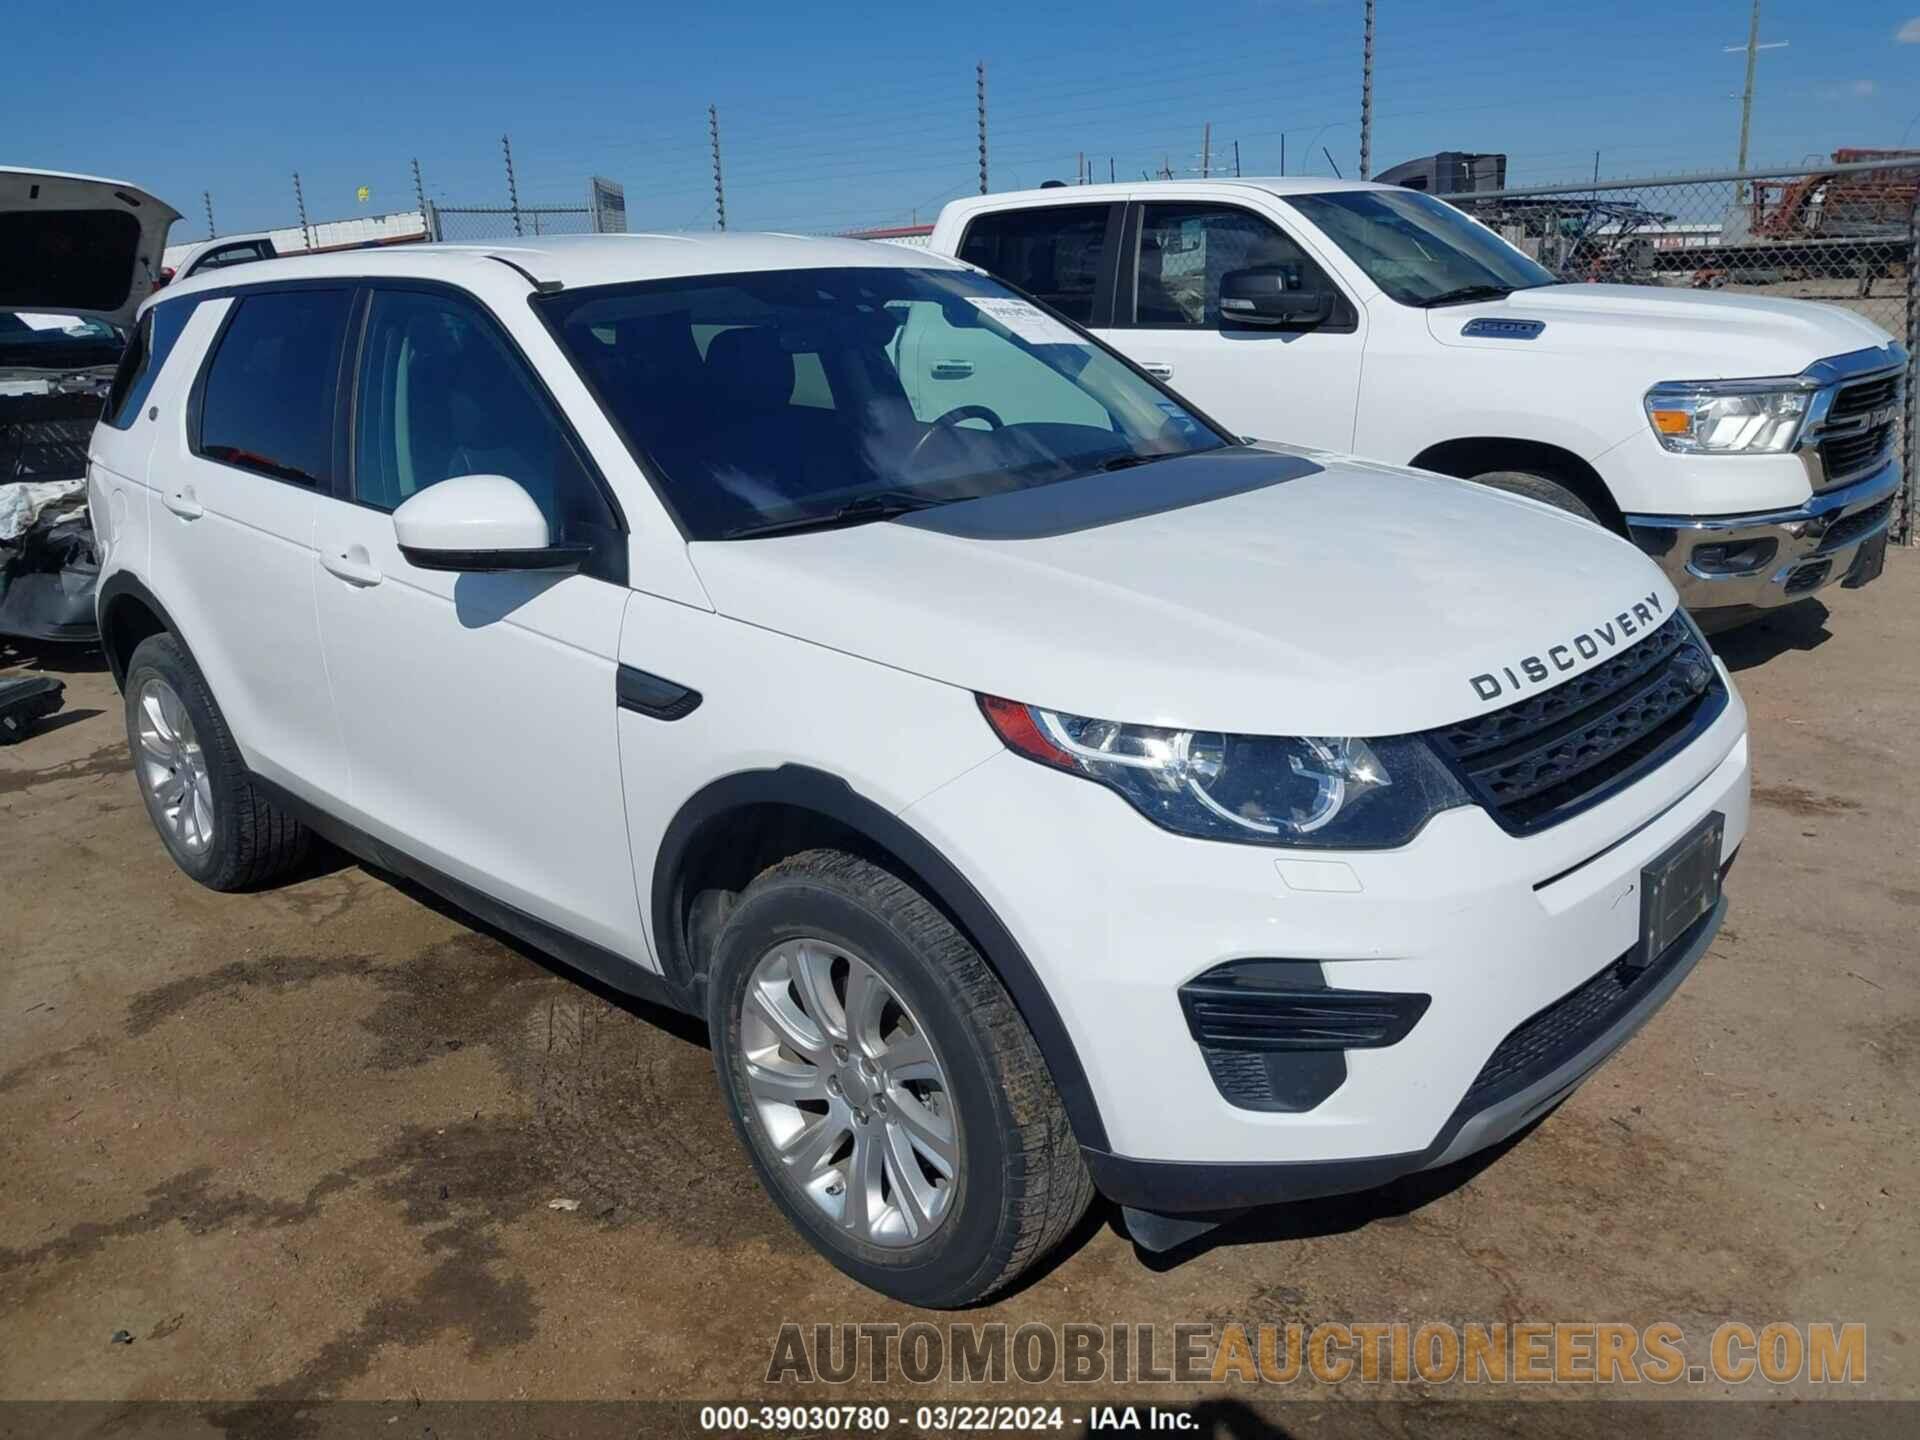 SALCP2BG0HH690417 LAND ROVER DISCOVERY SPORT 2017